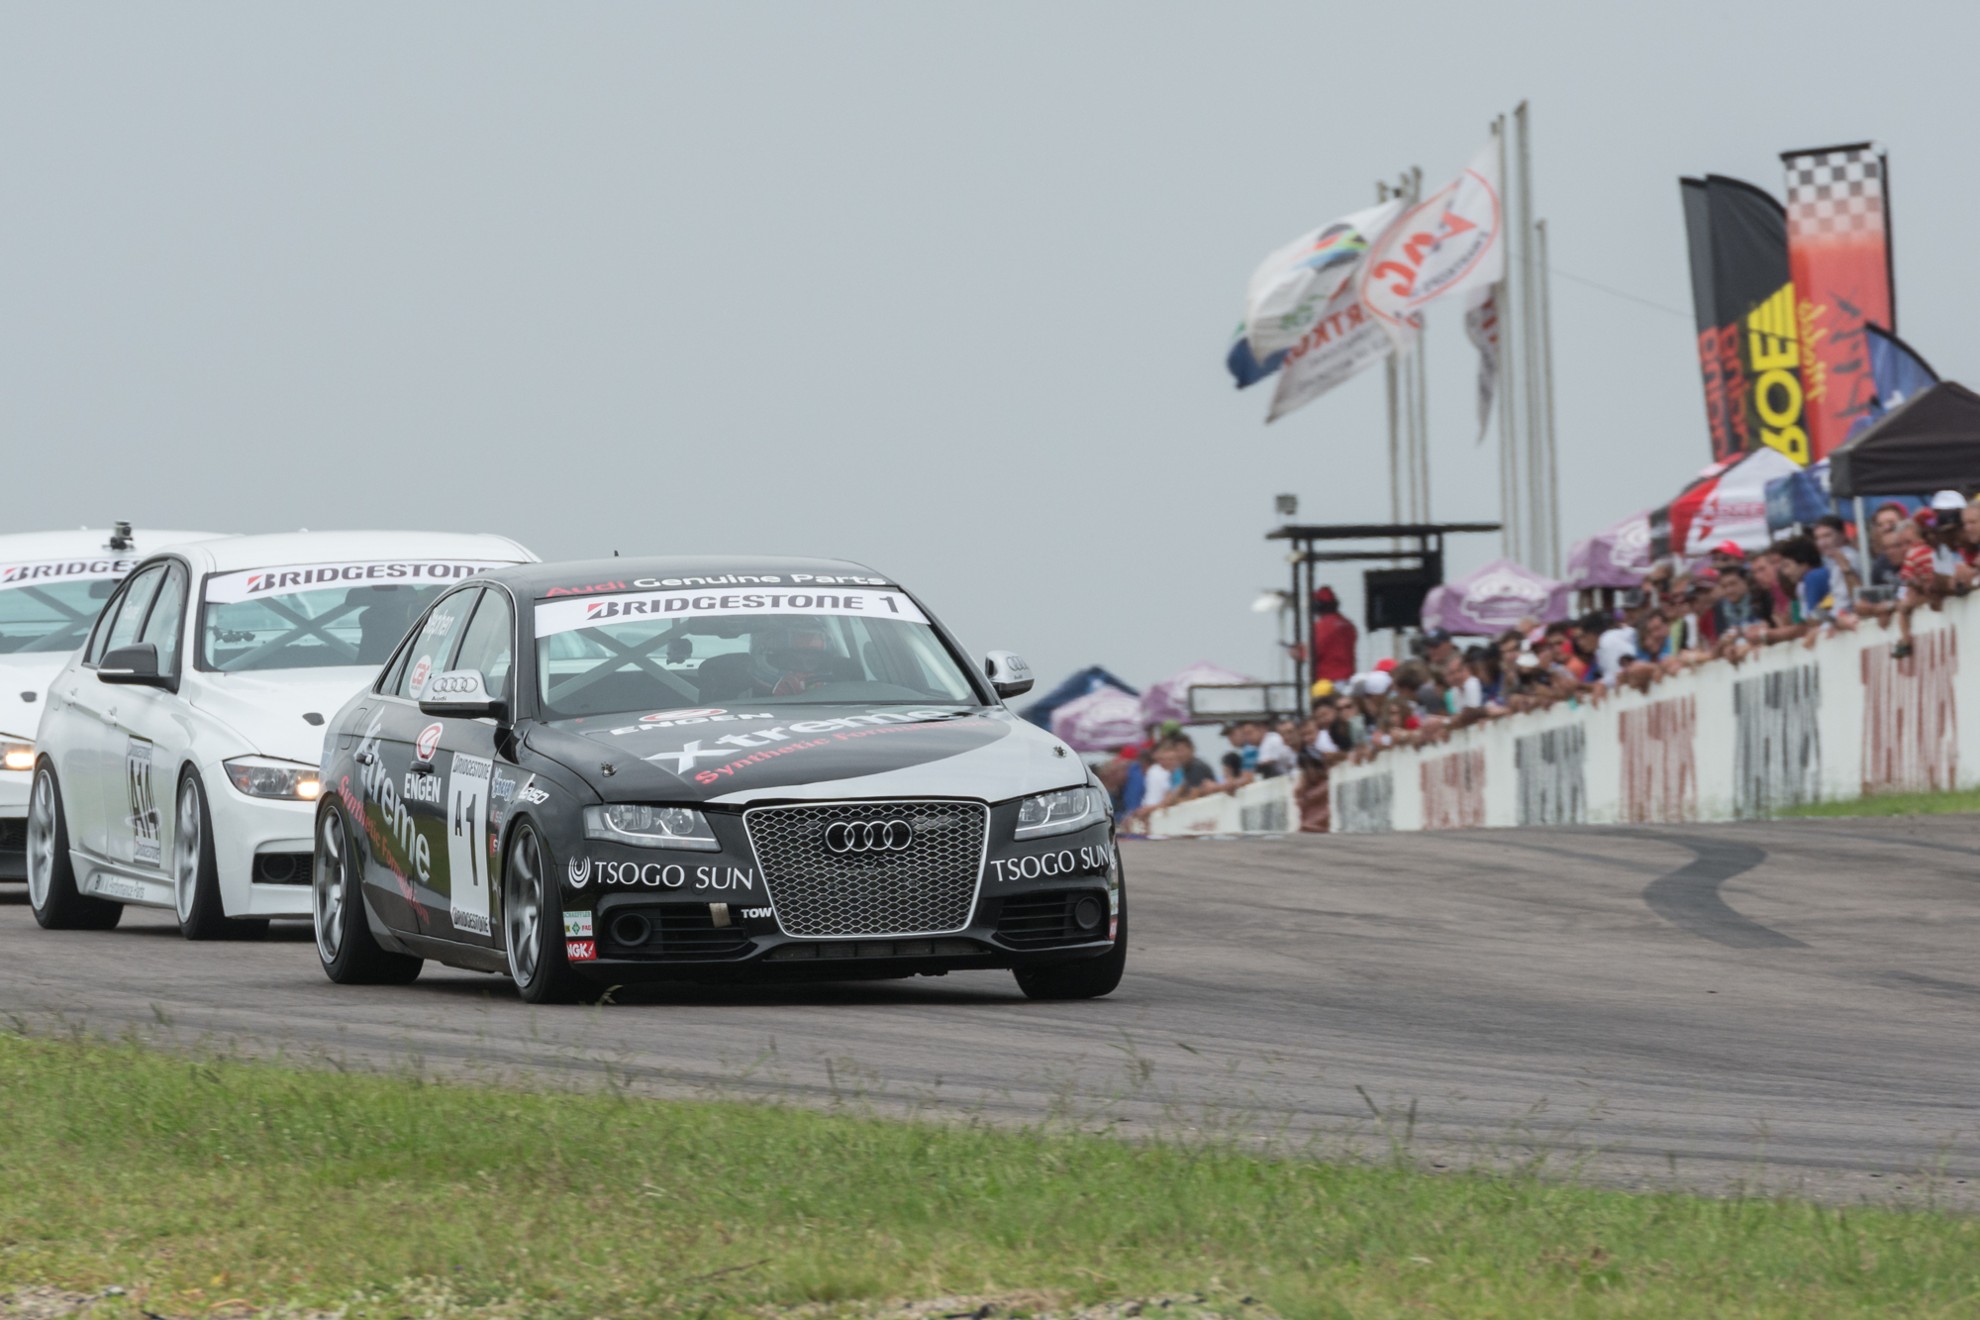 Audi Racers Have Eye on Another Dominant Display